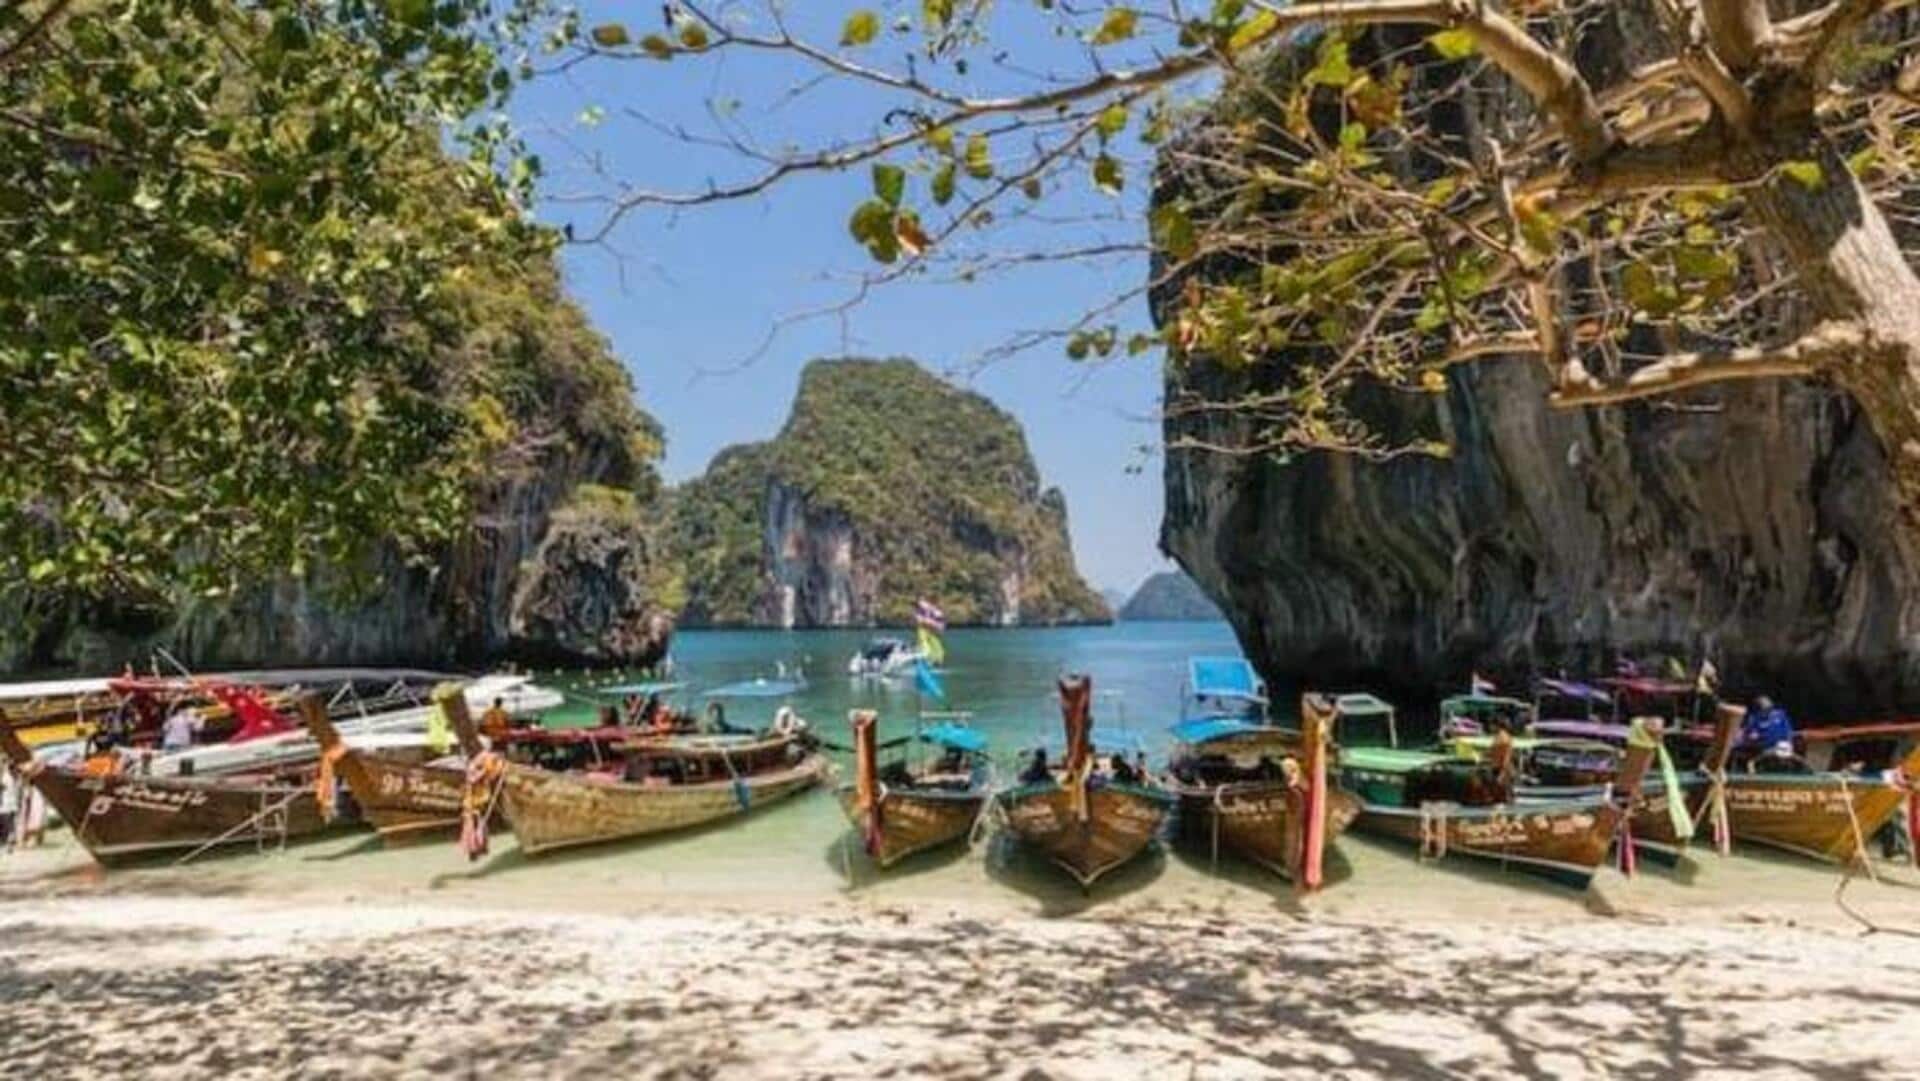 Now, Indian tourists can travel to Thailand without visa